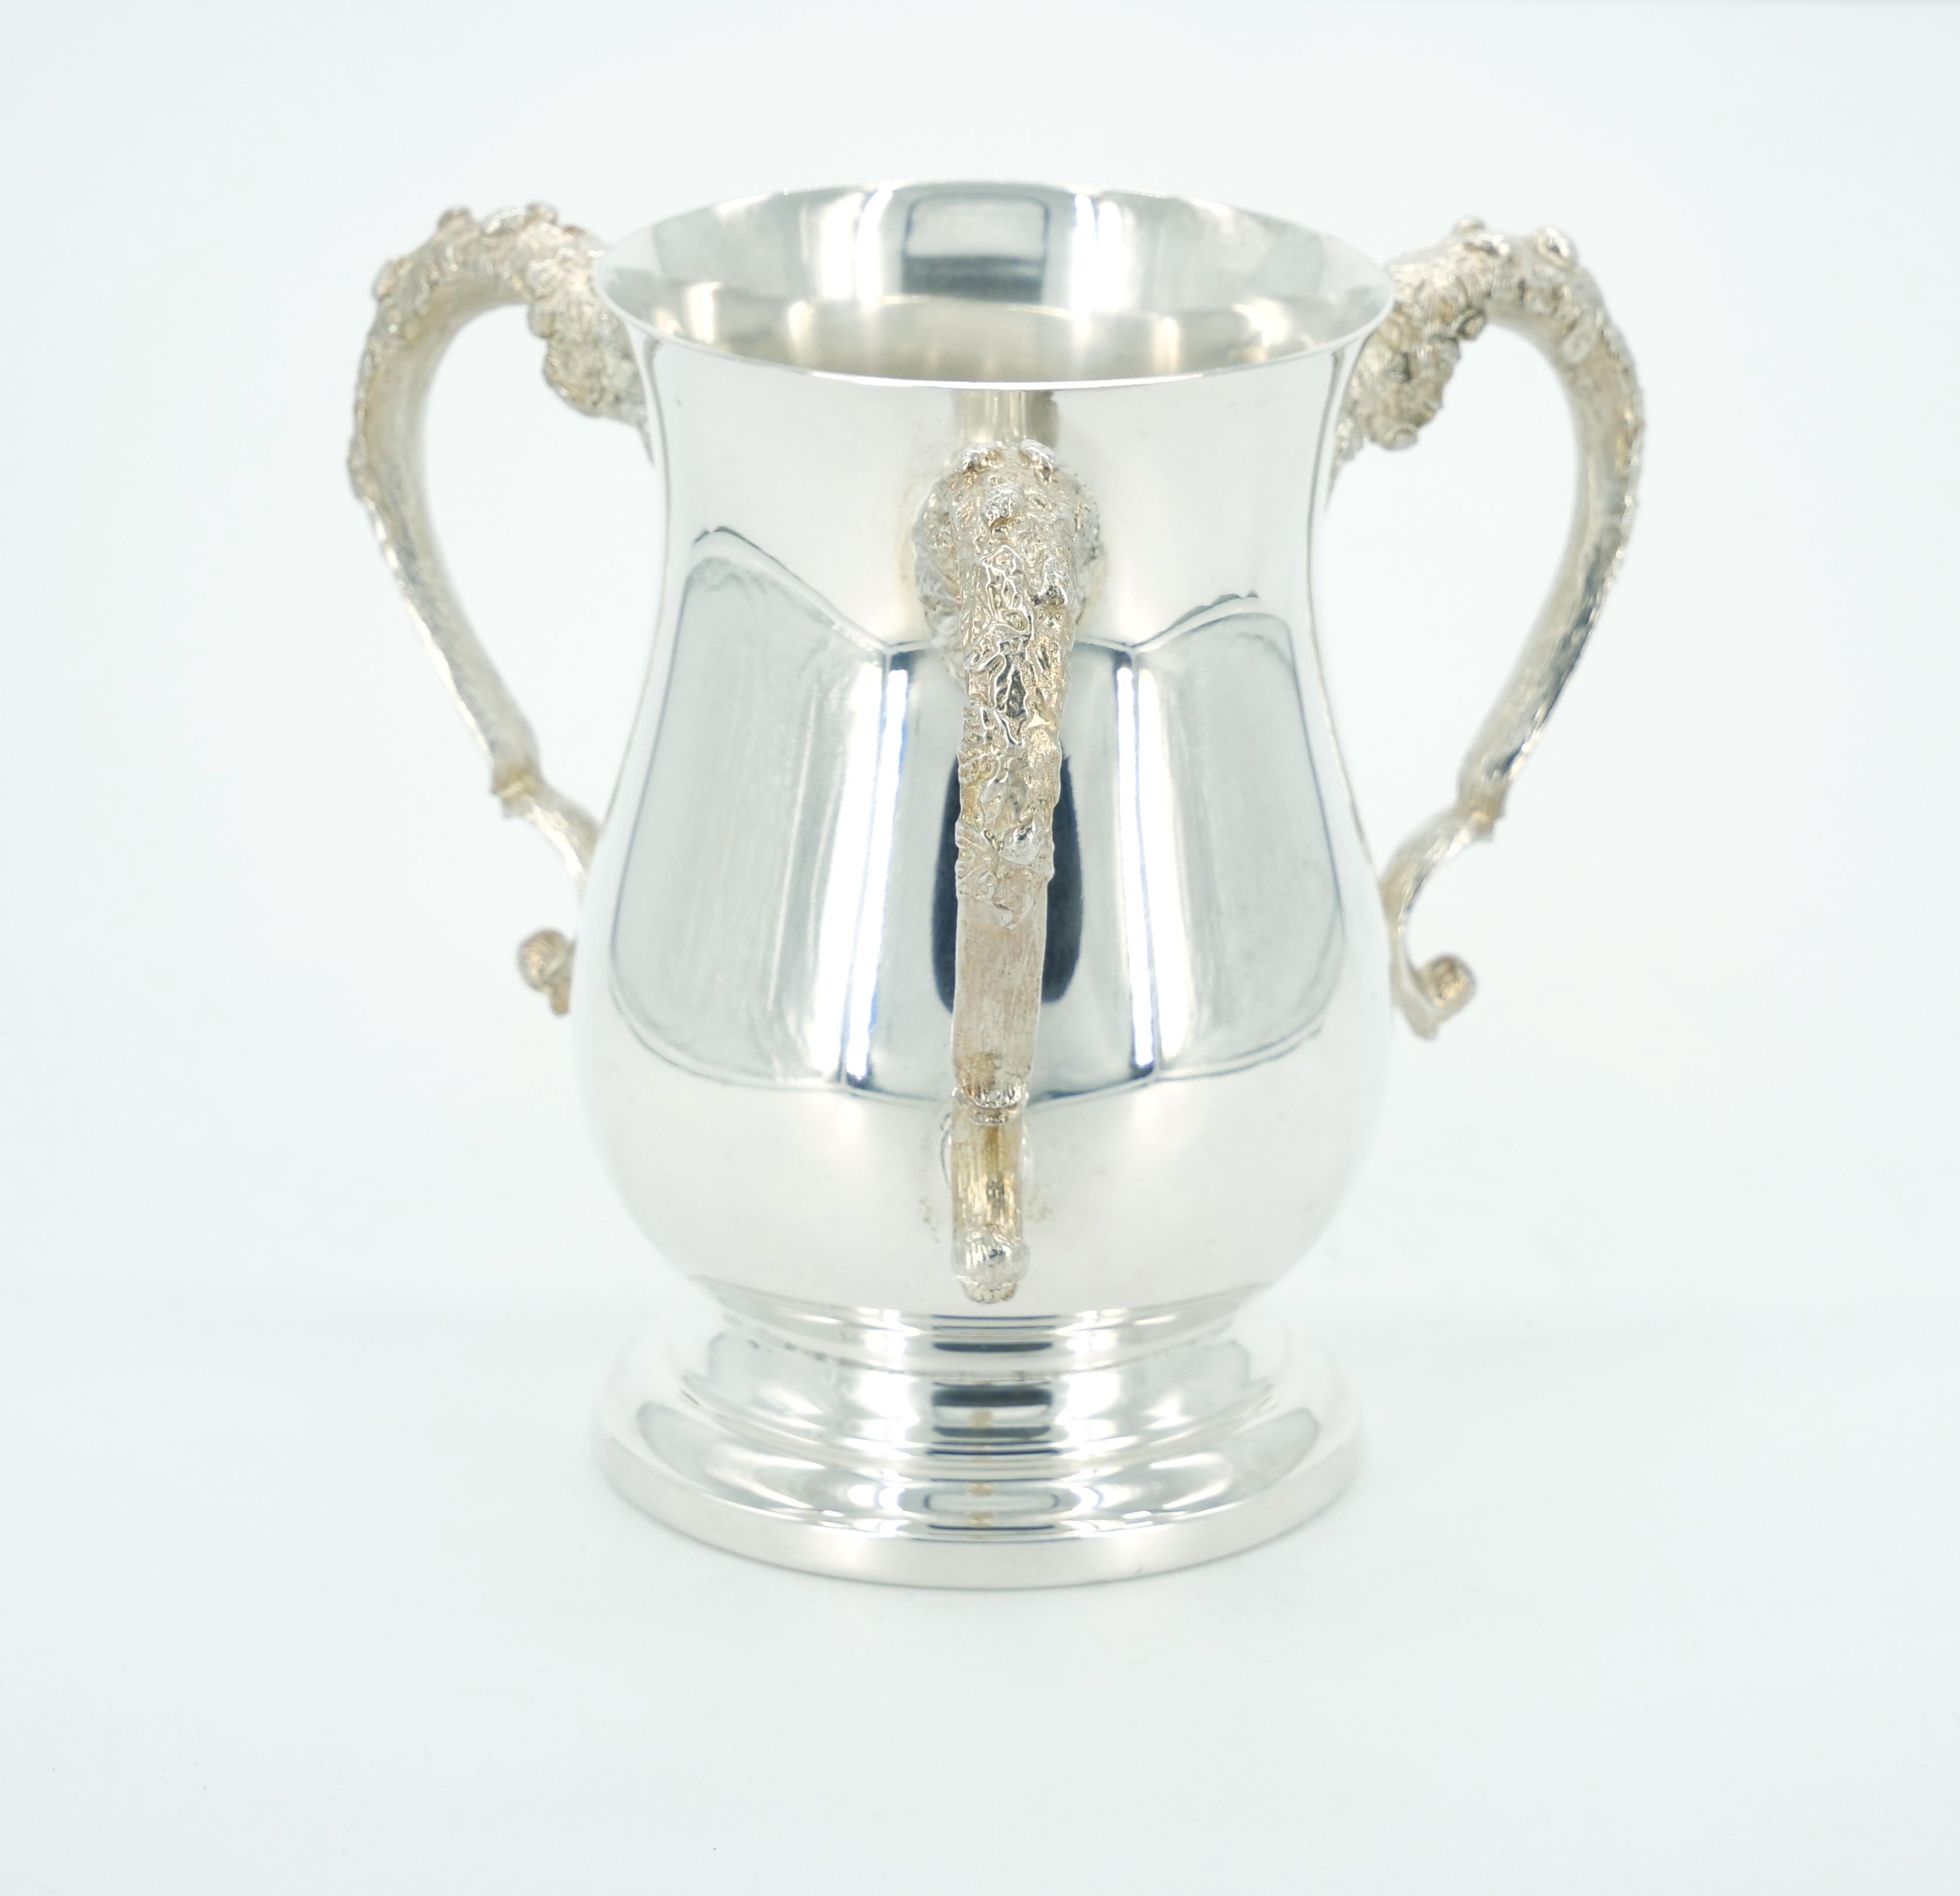 Step into the refined elegance of the 19th century with our English Silver-Plated Three-Handled Cup Vase, perched upon a round footed base. This exquisite piece is a testament to the enduring charm of English craftsmanship, combining intricate